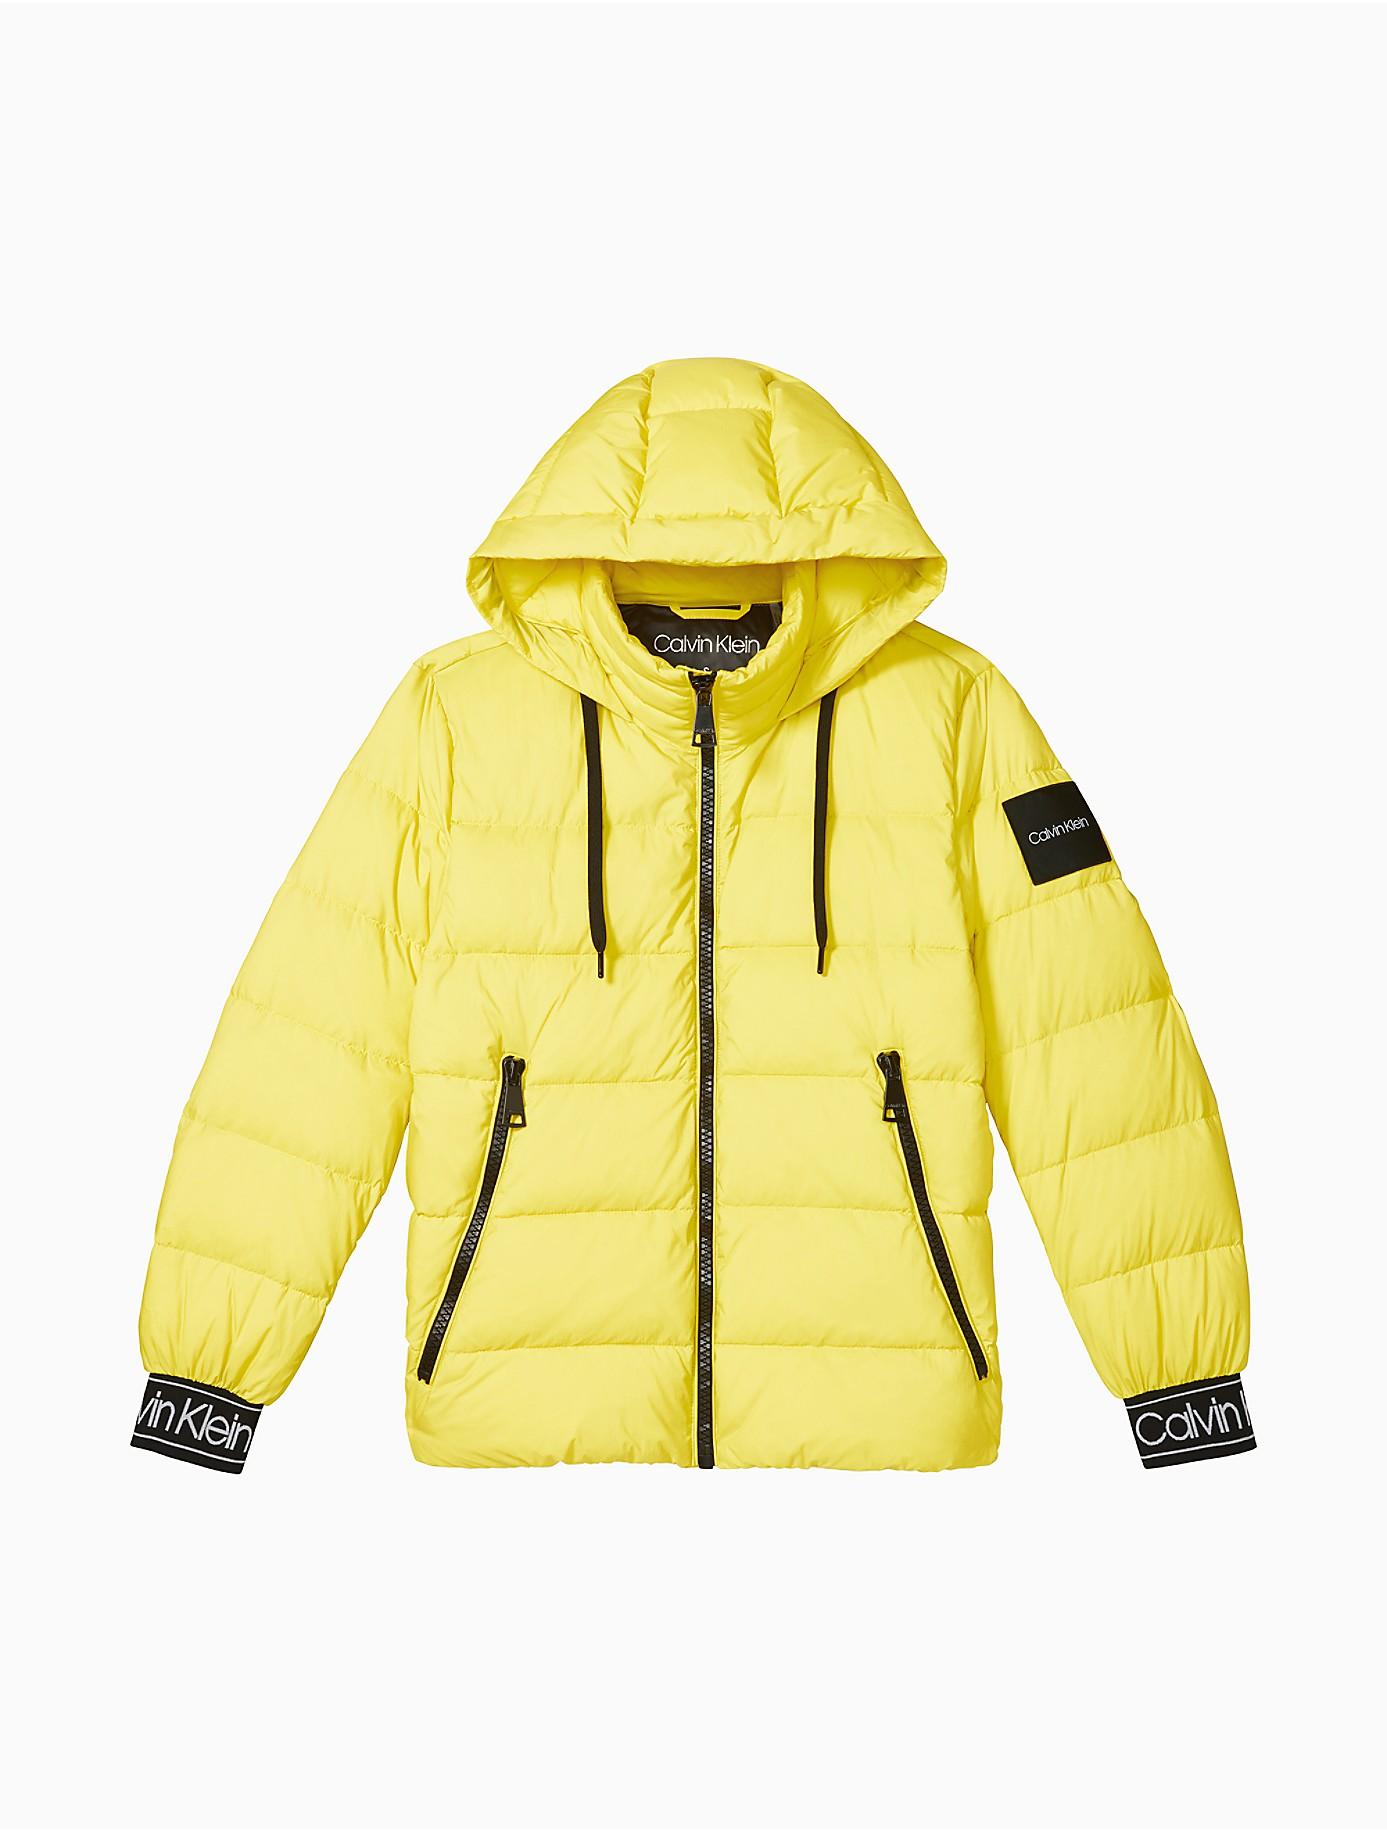 Calvin Klein Synthetic Logo Hooded Puffer Jacket in Neon Yellow (Yellow ...